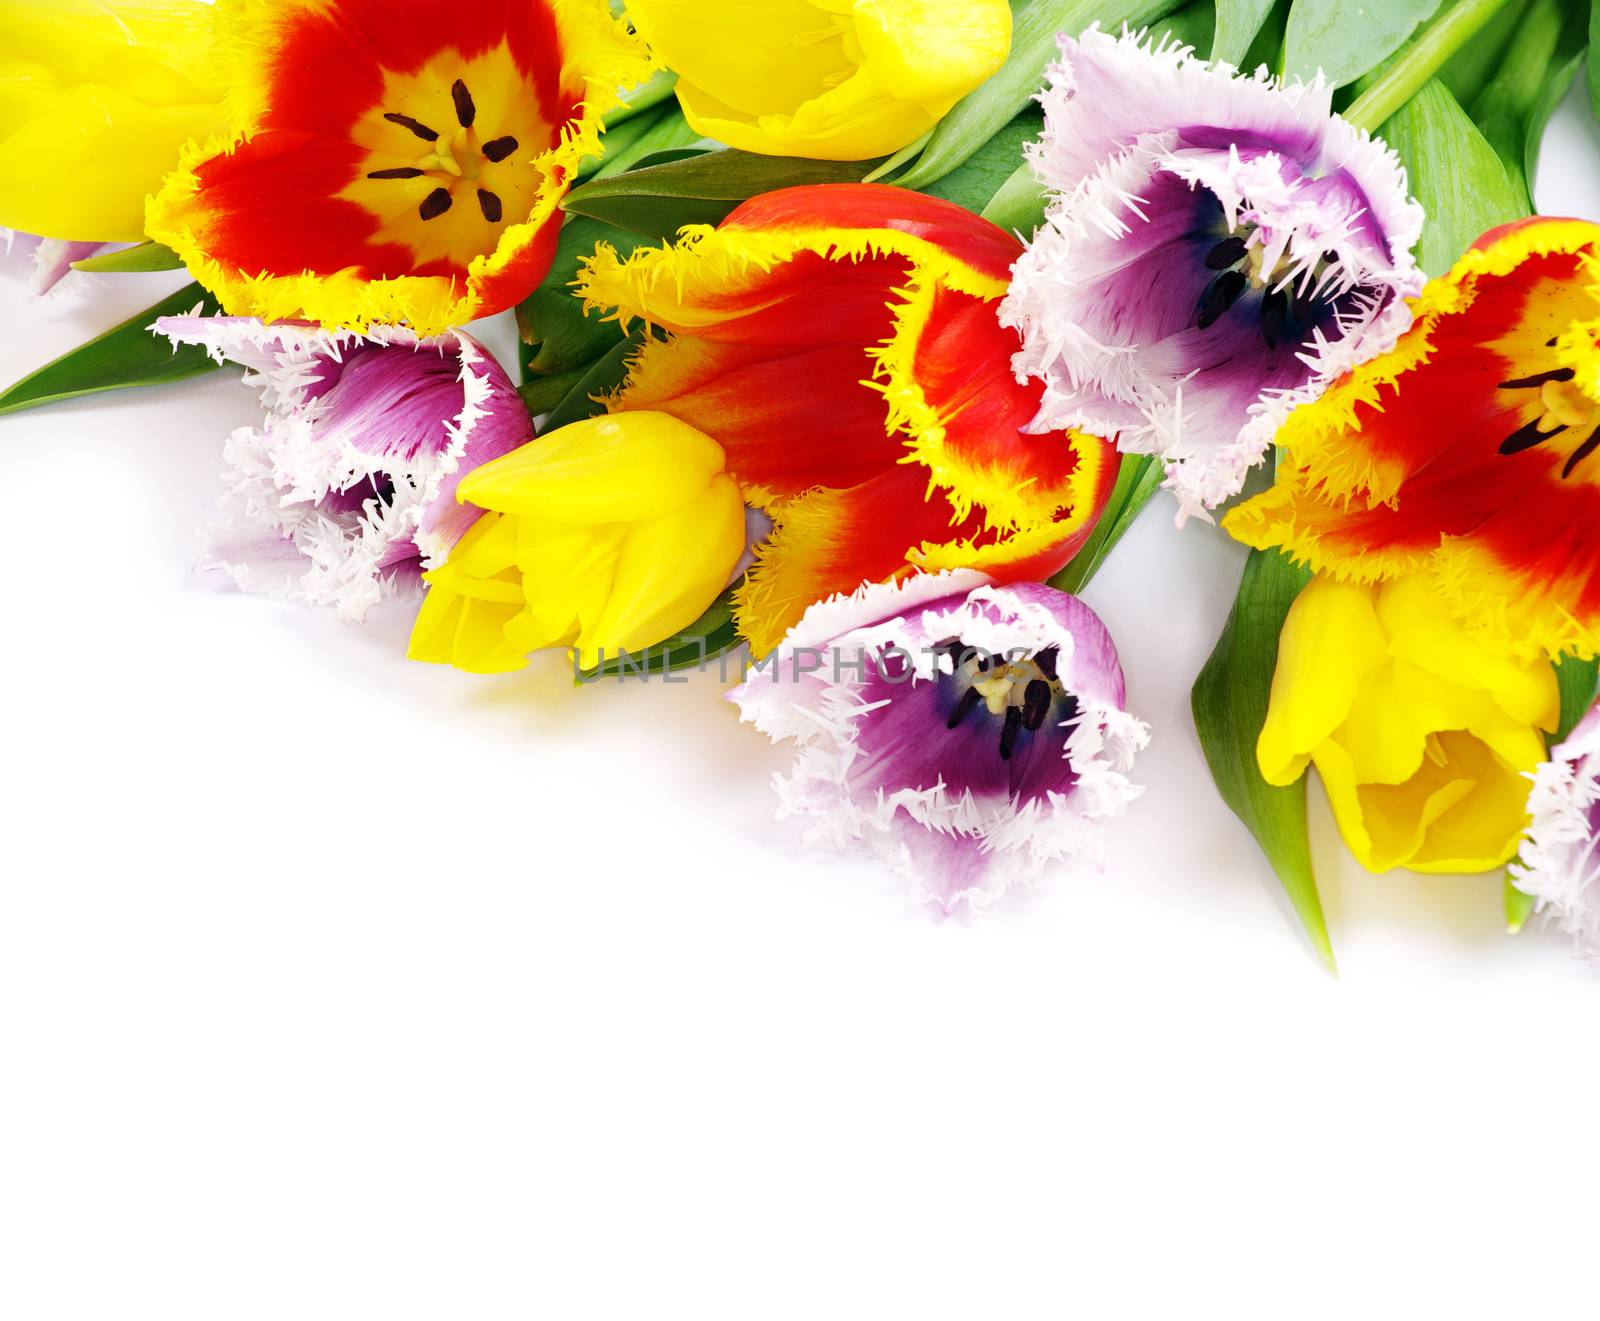 bouquet of the fresh tulips on white background